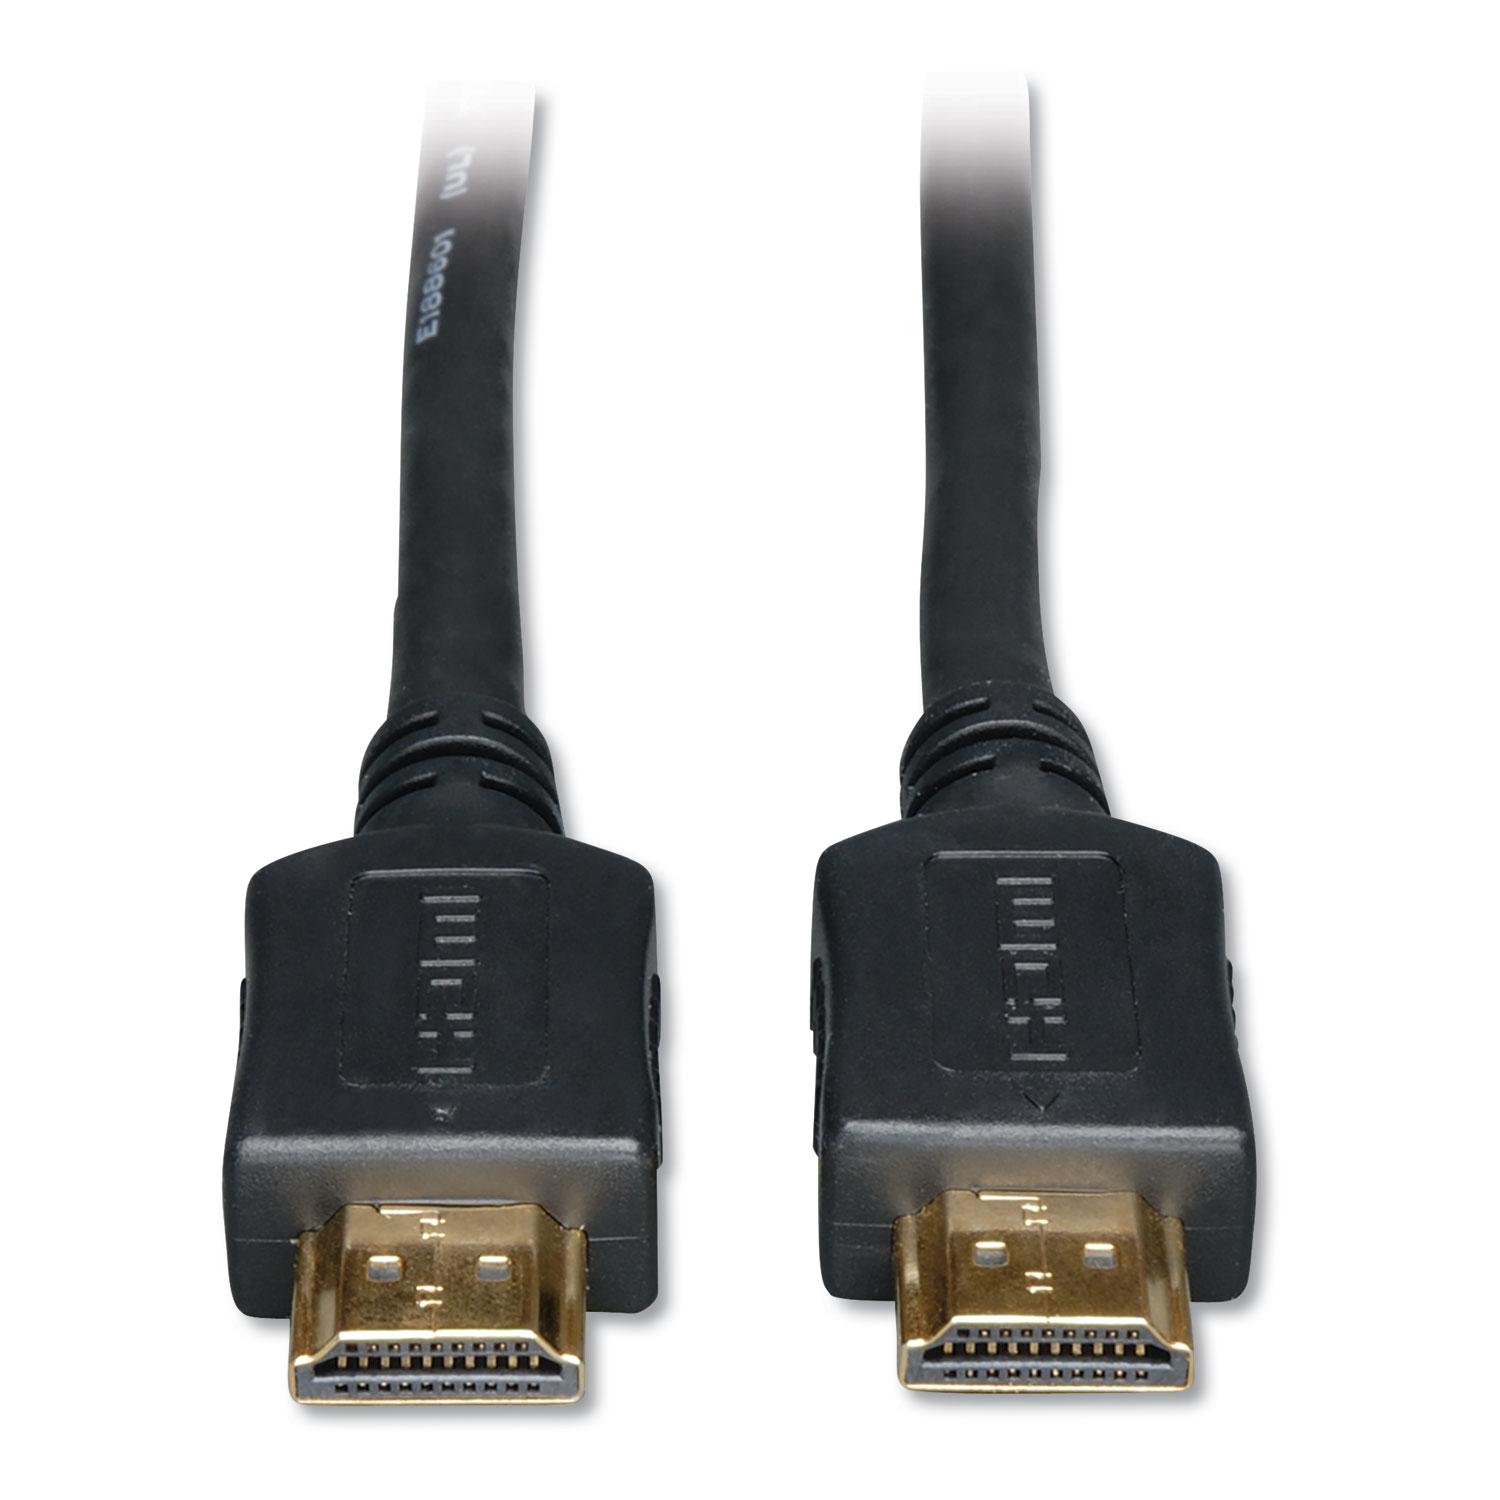  Tripp Lite P568-035 High Speed HDMI Cable, HD 1080p, Digital Video with Audio (M/M), 35 ft. (TRPP568035) 